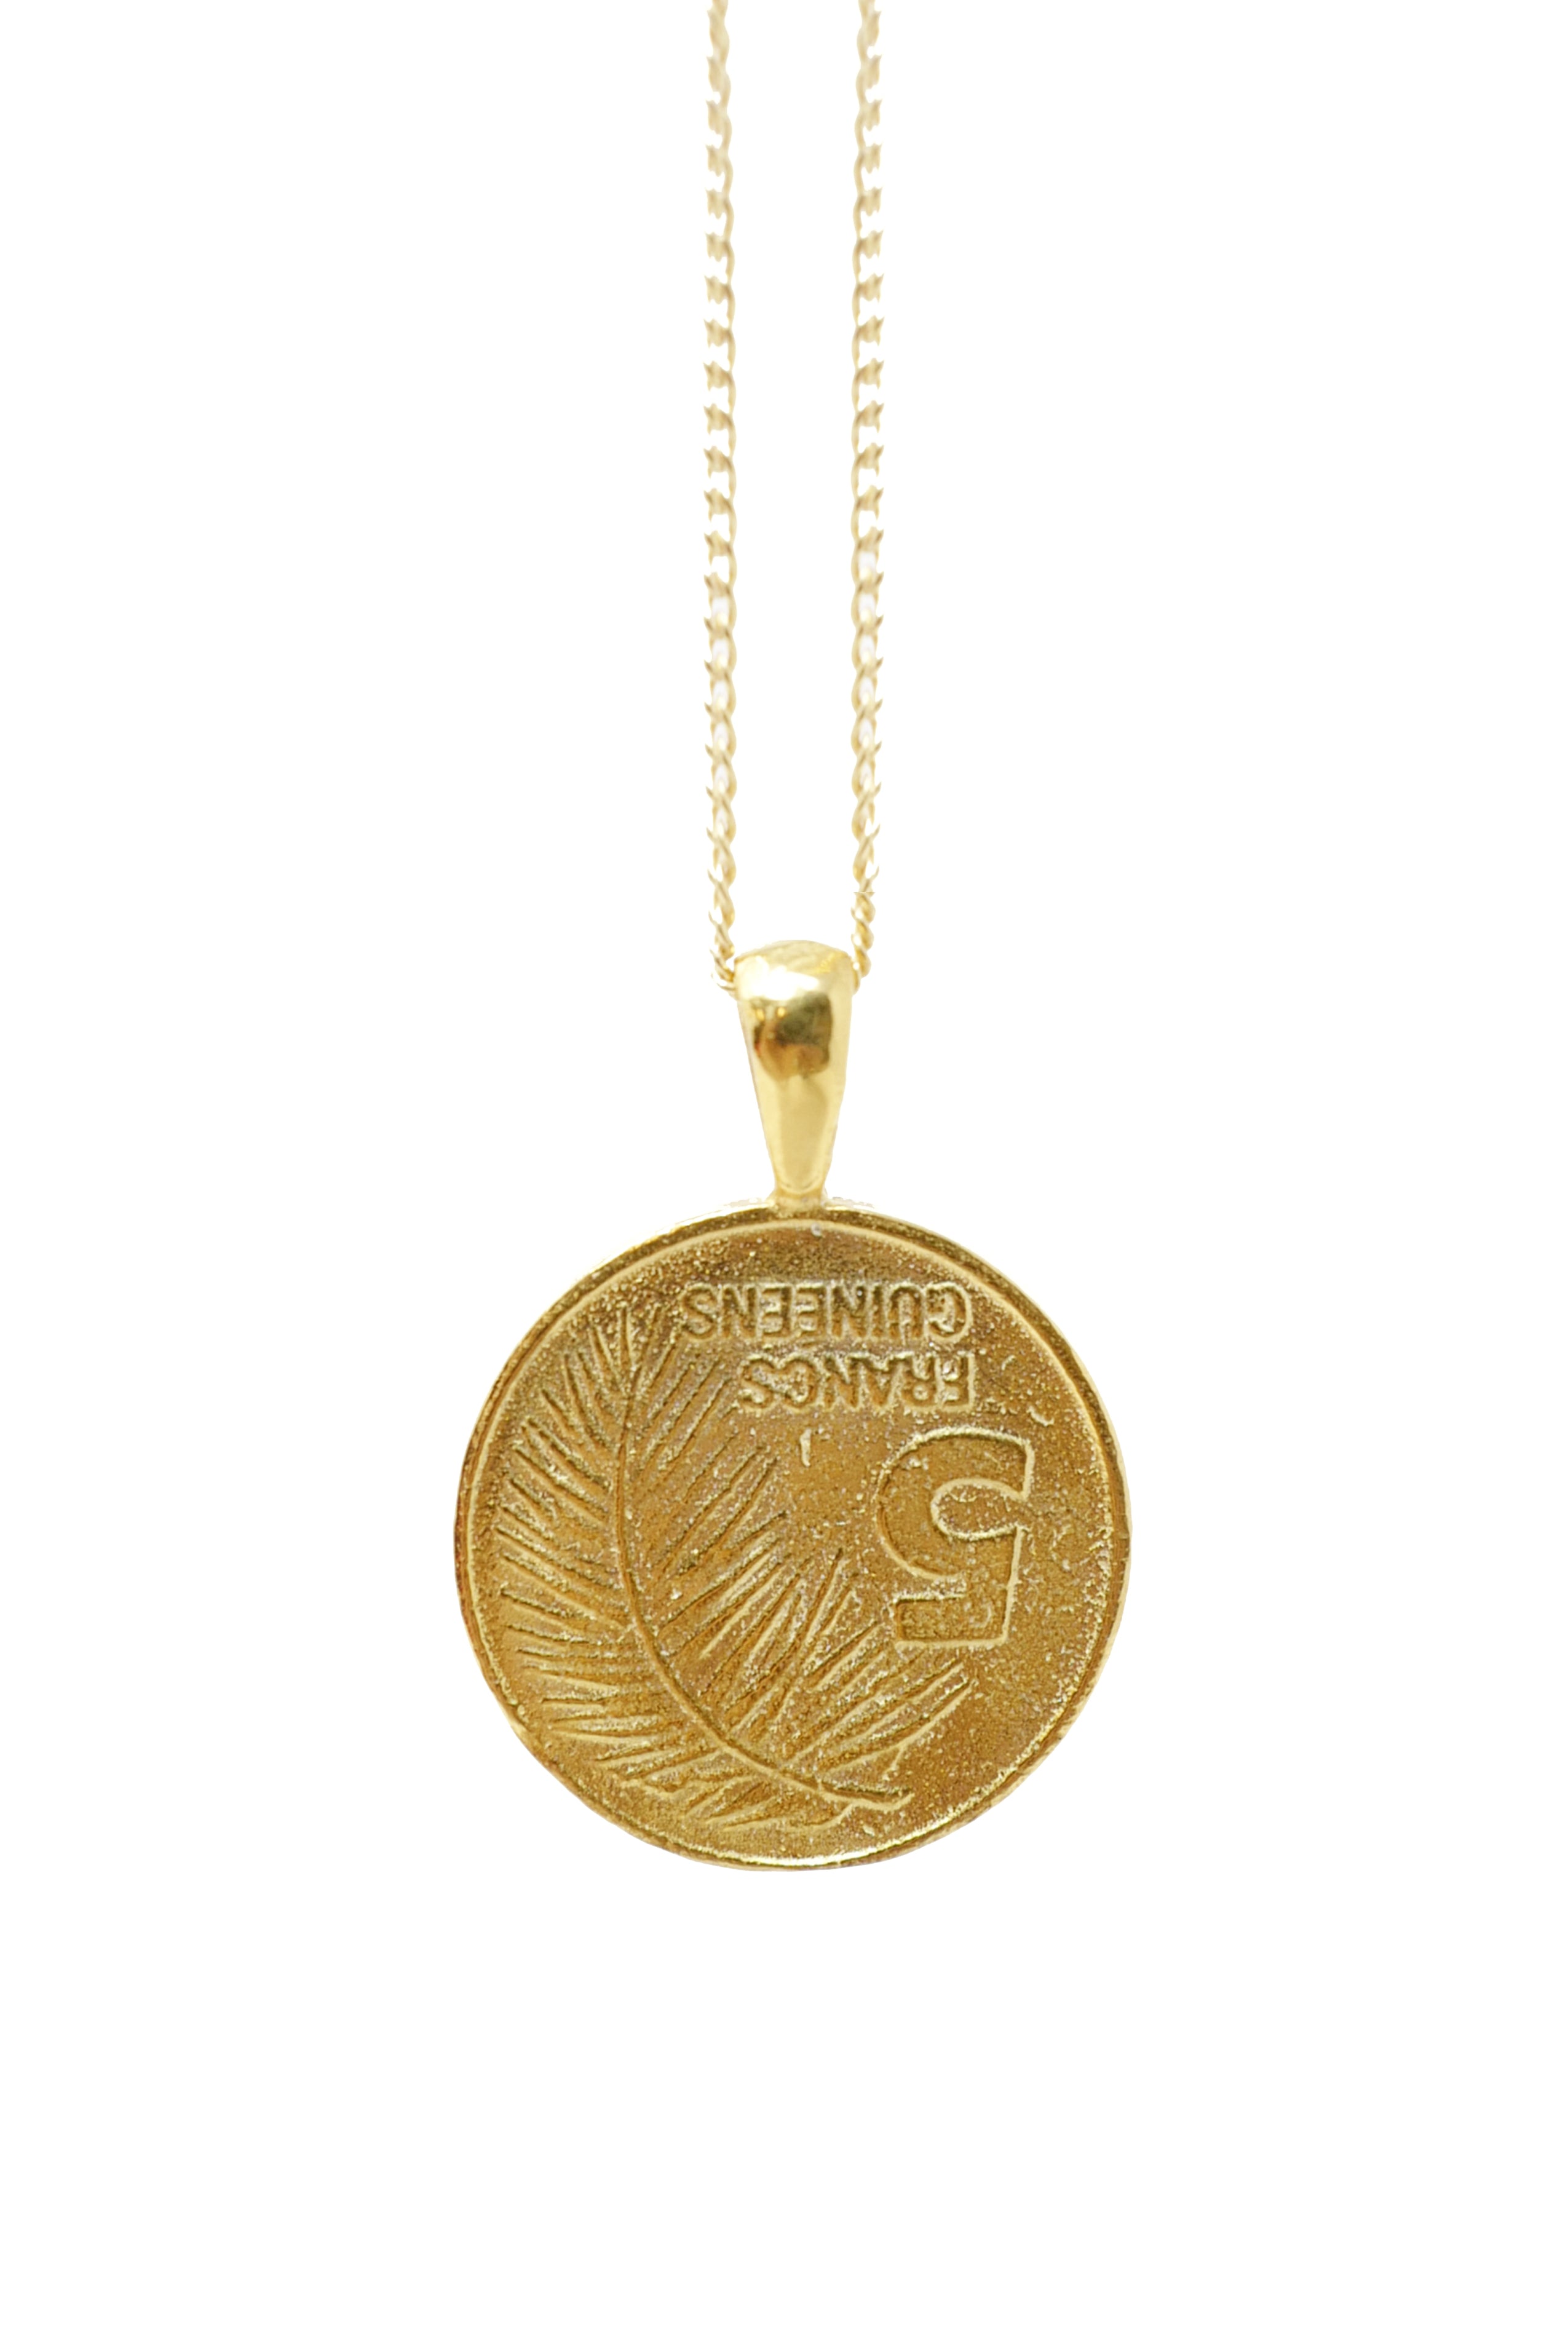 THE GUINEA Coin Necklace – omiwoods